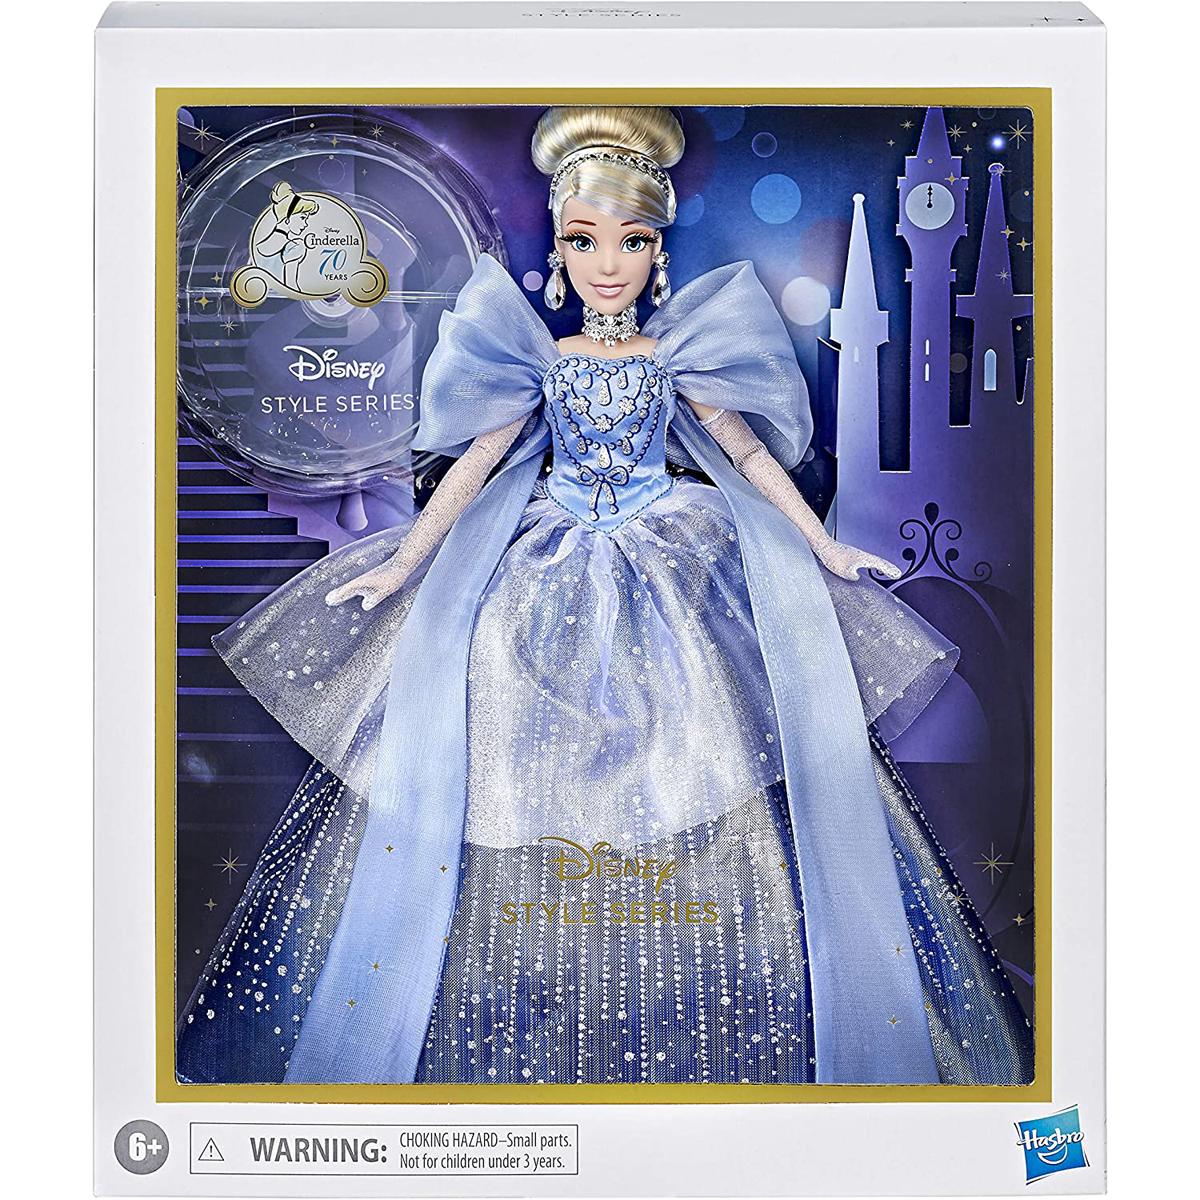 Disney Princess Style Series Holiday Style Cinderella for $15.99